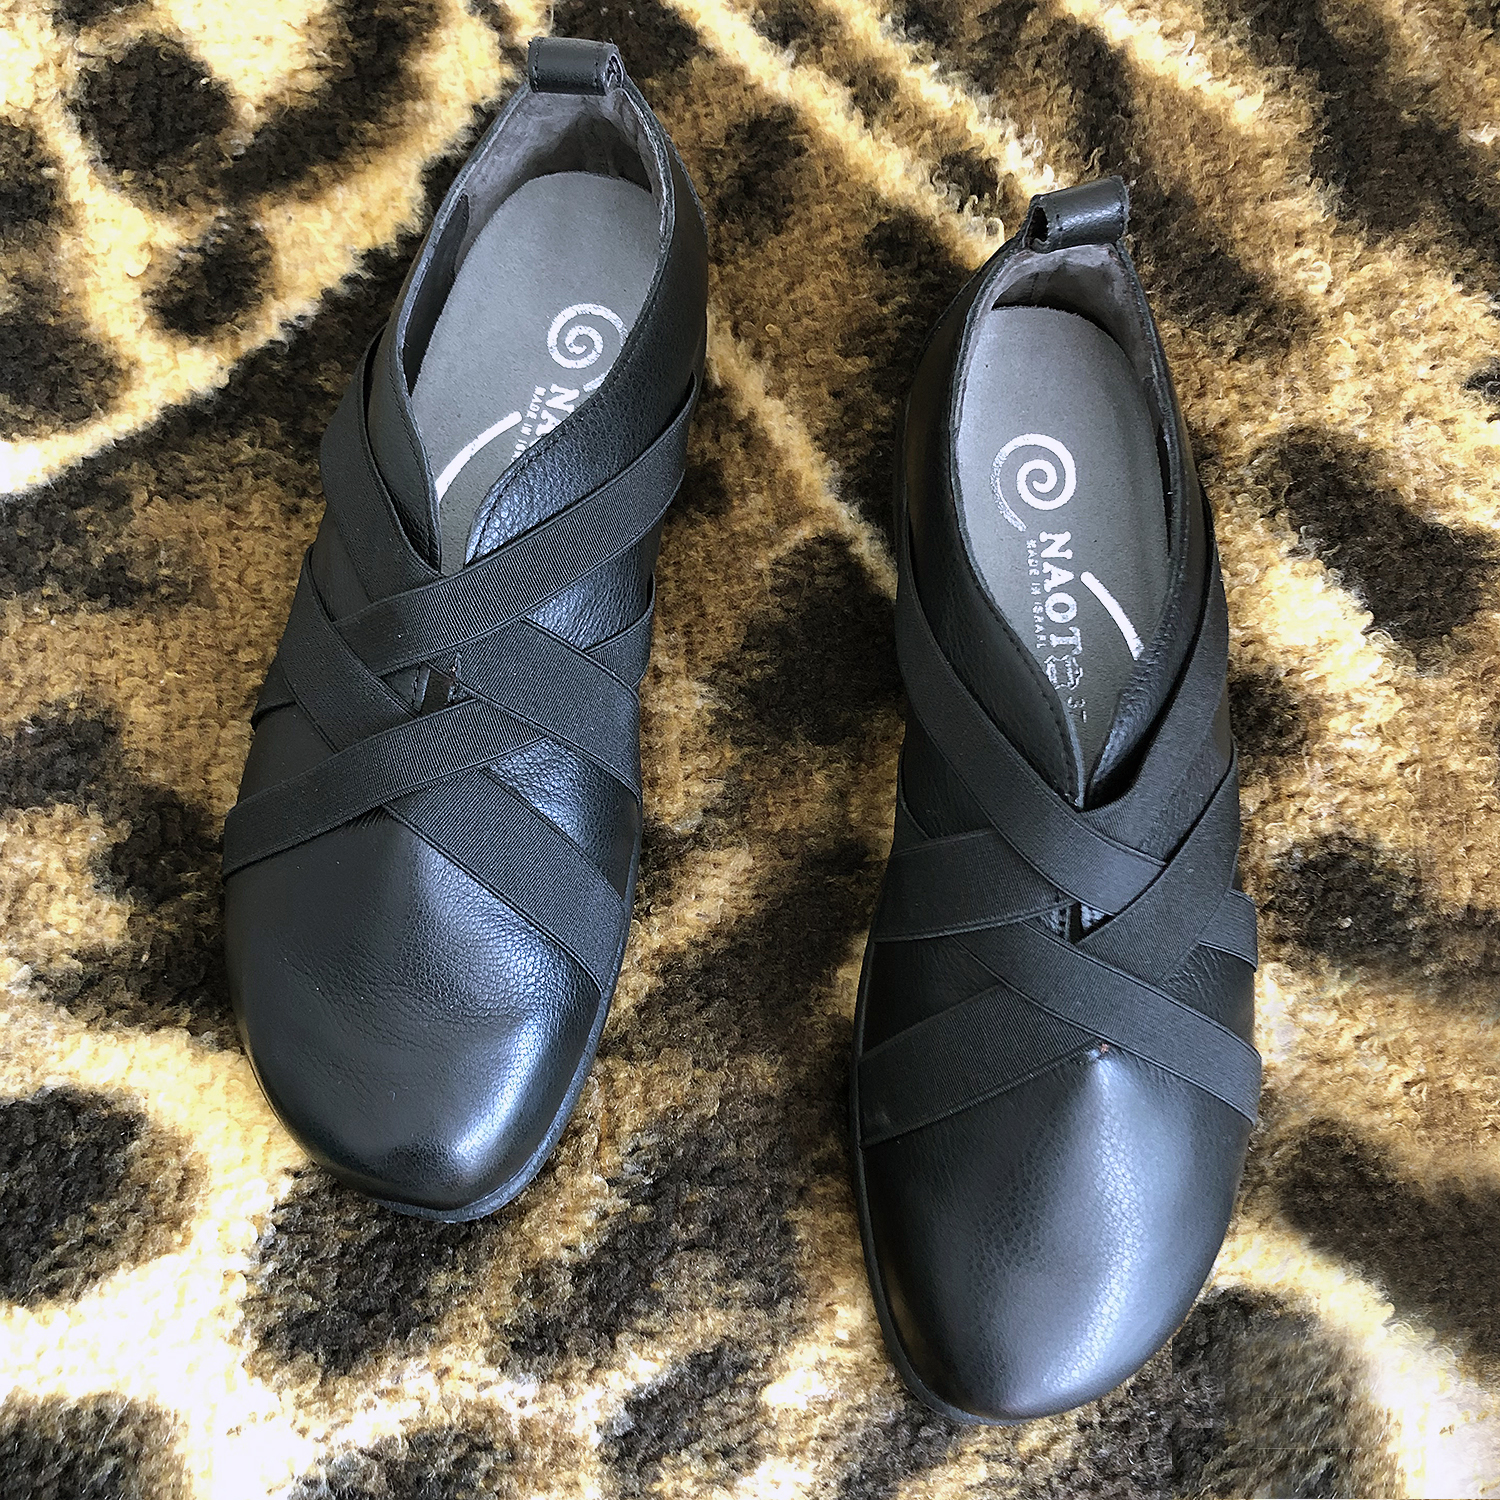 naot shoes for plantar fasciitis